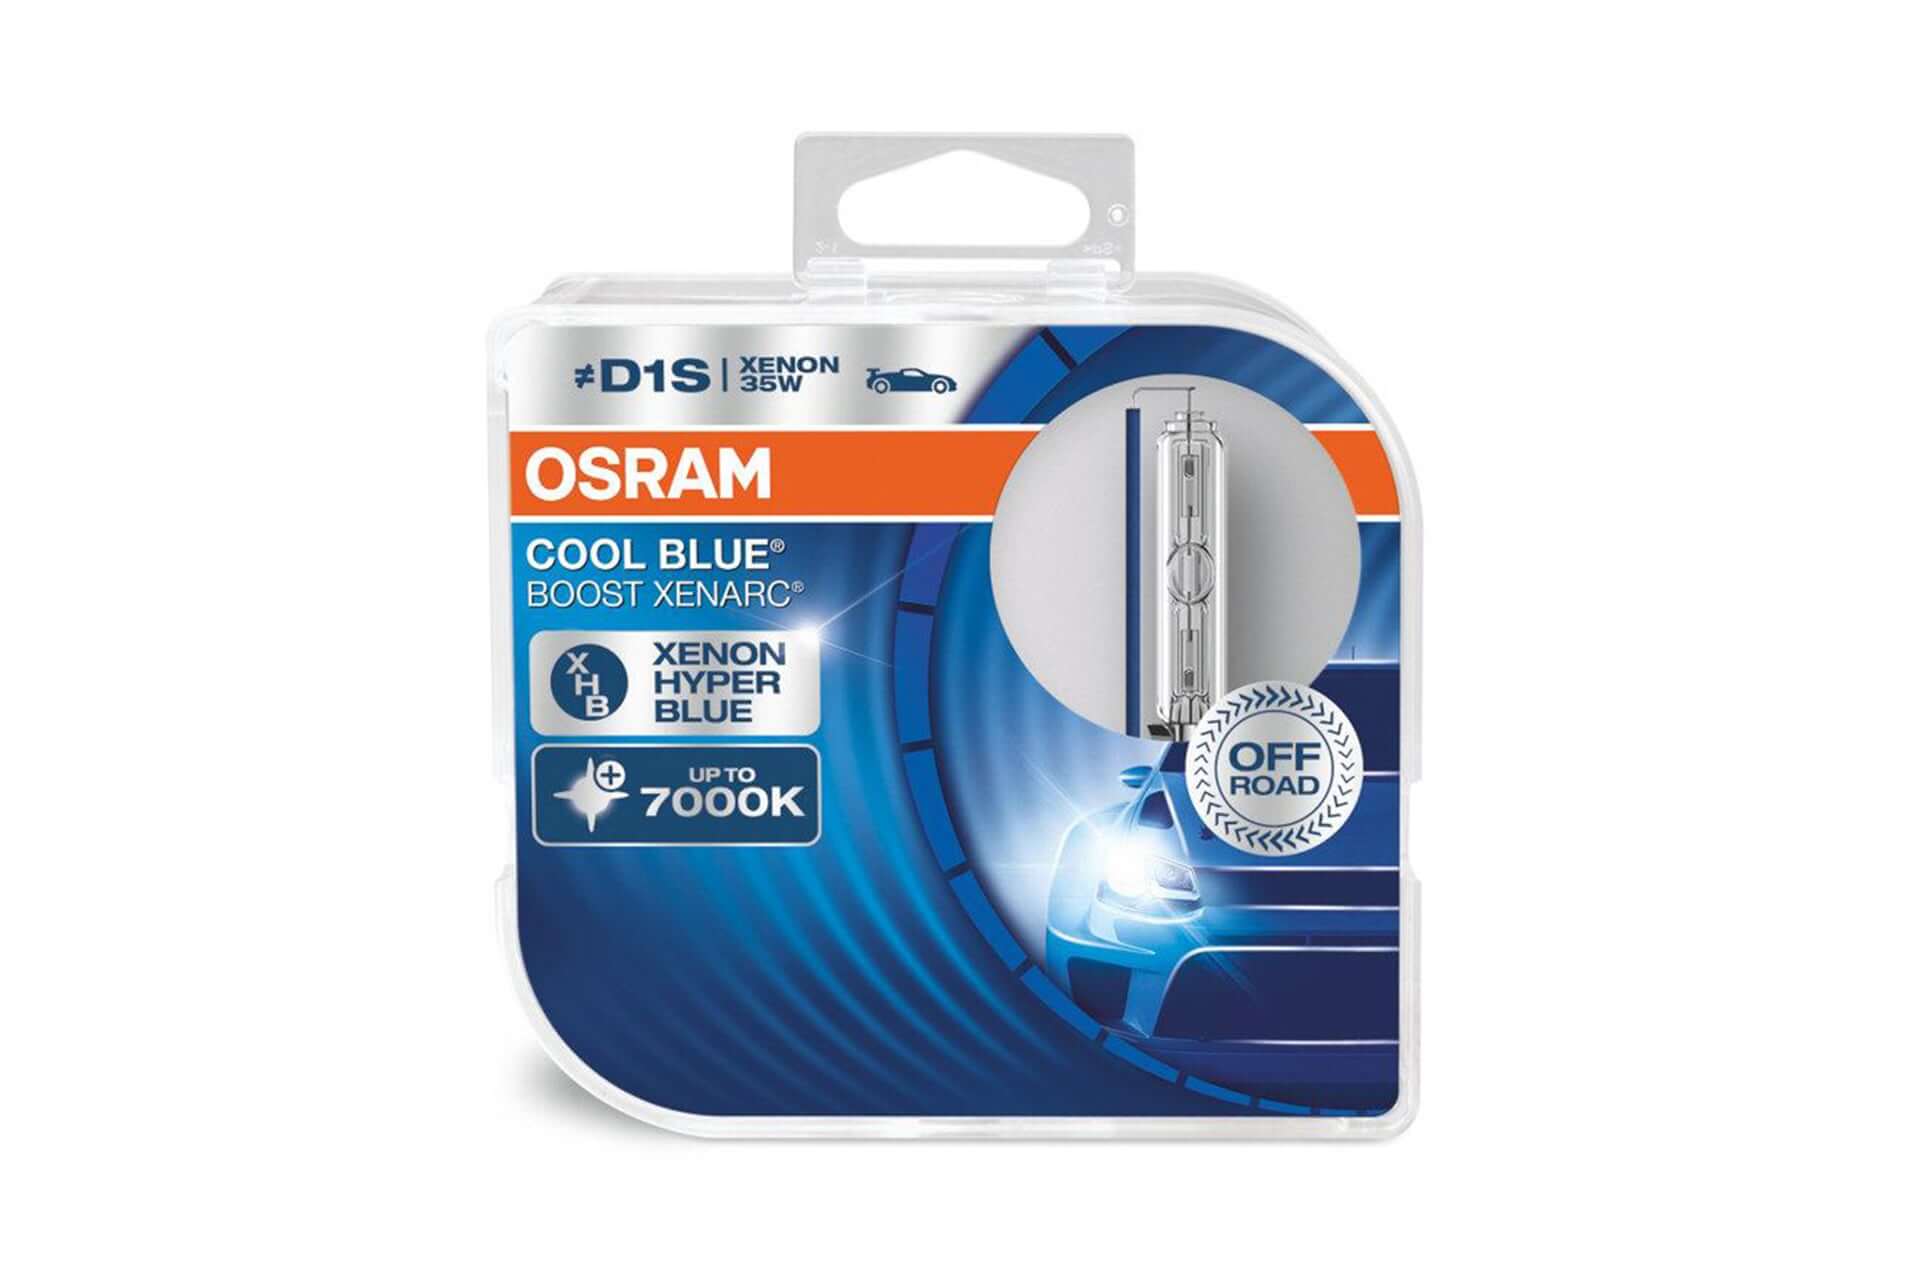 Osram / Philips / Phares LED / exclus des campagnes